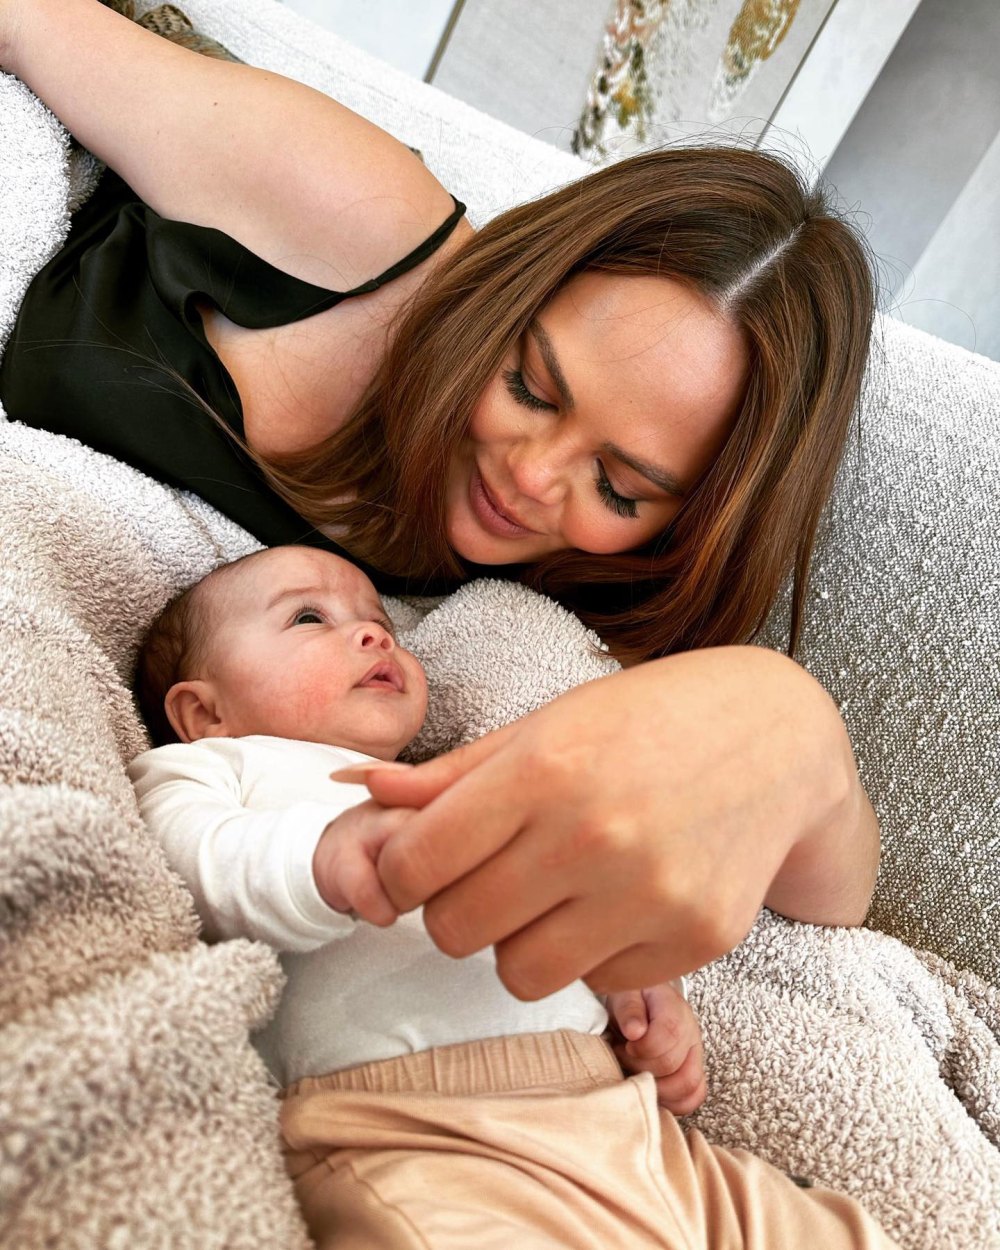 Chrissy Teigen Embraces Lifetime Scars and Body Imperfections While Sitting Nude in the Bath With Daughter Esti